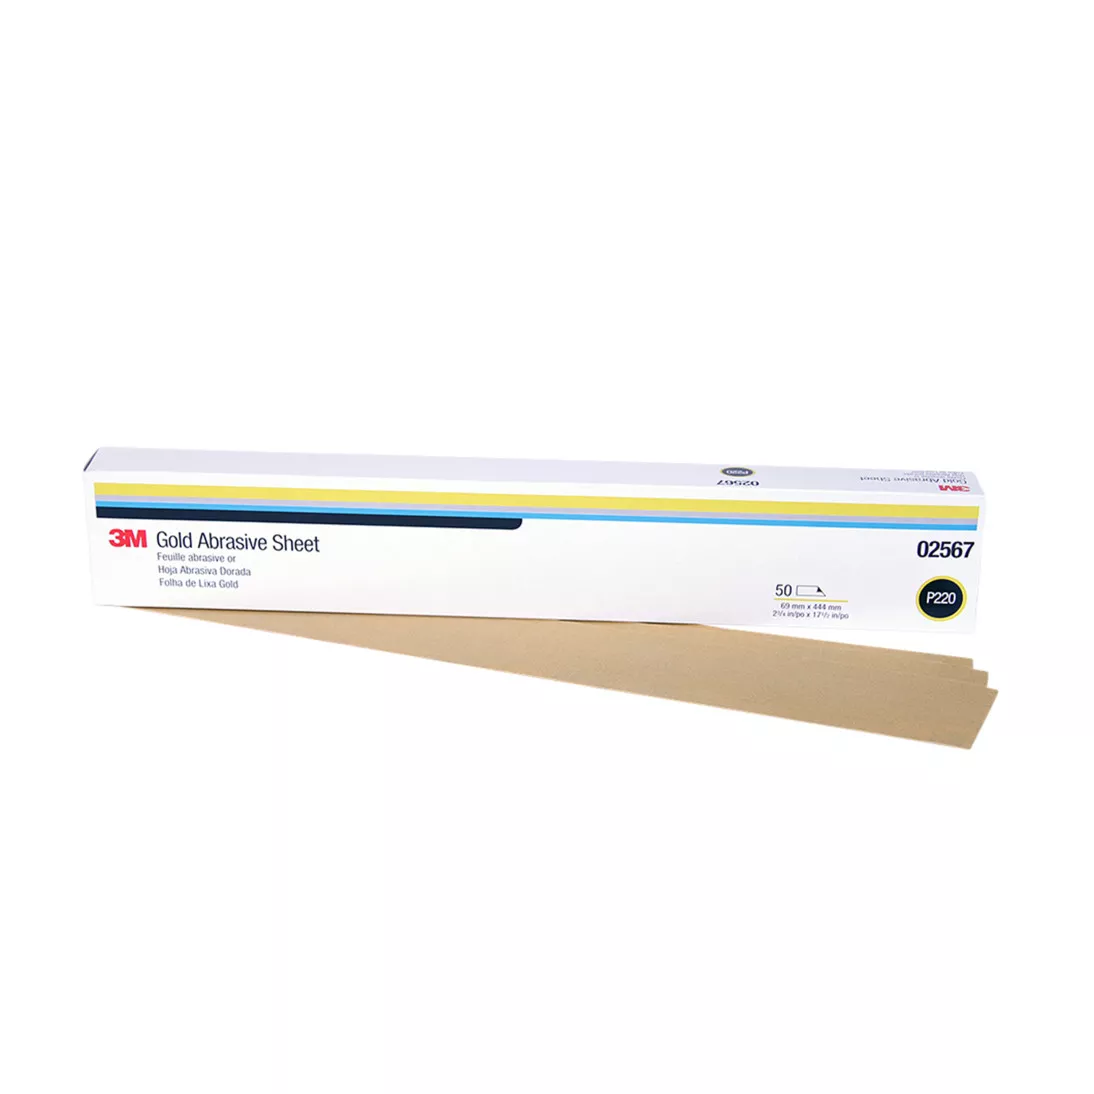 3M™ Gold Abrasive Sheet, 02567, P220 grade, 2 3/4 in x 17 1/2 in, 50
sheets per sleeve, 5 sleeves per case